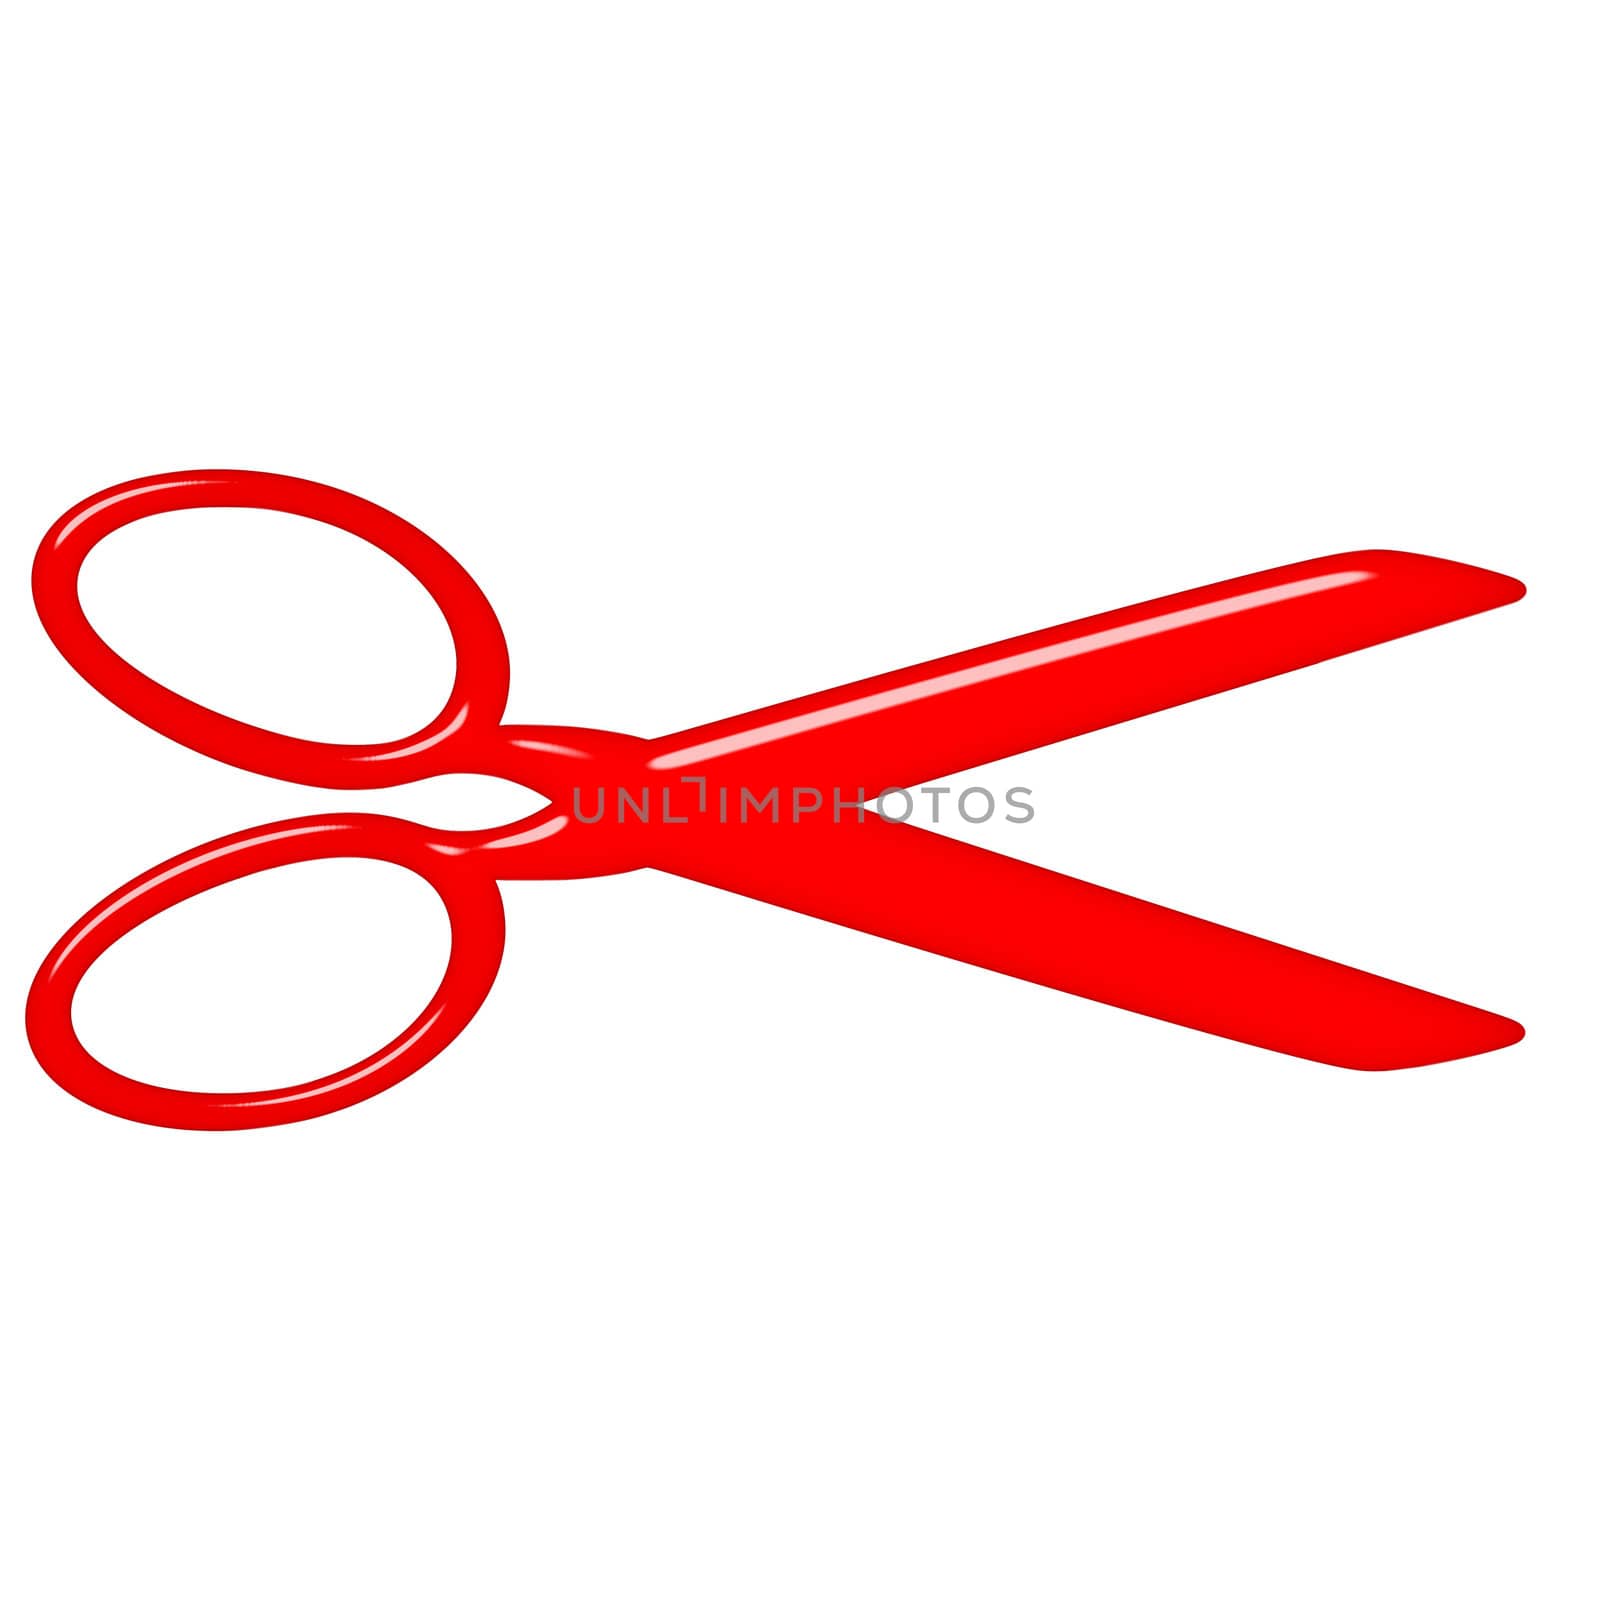 3d scissors isolated in white